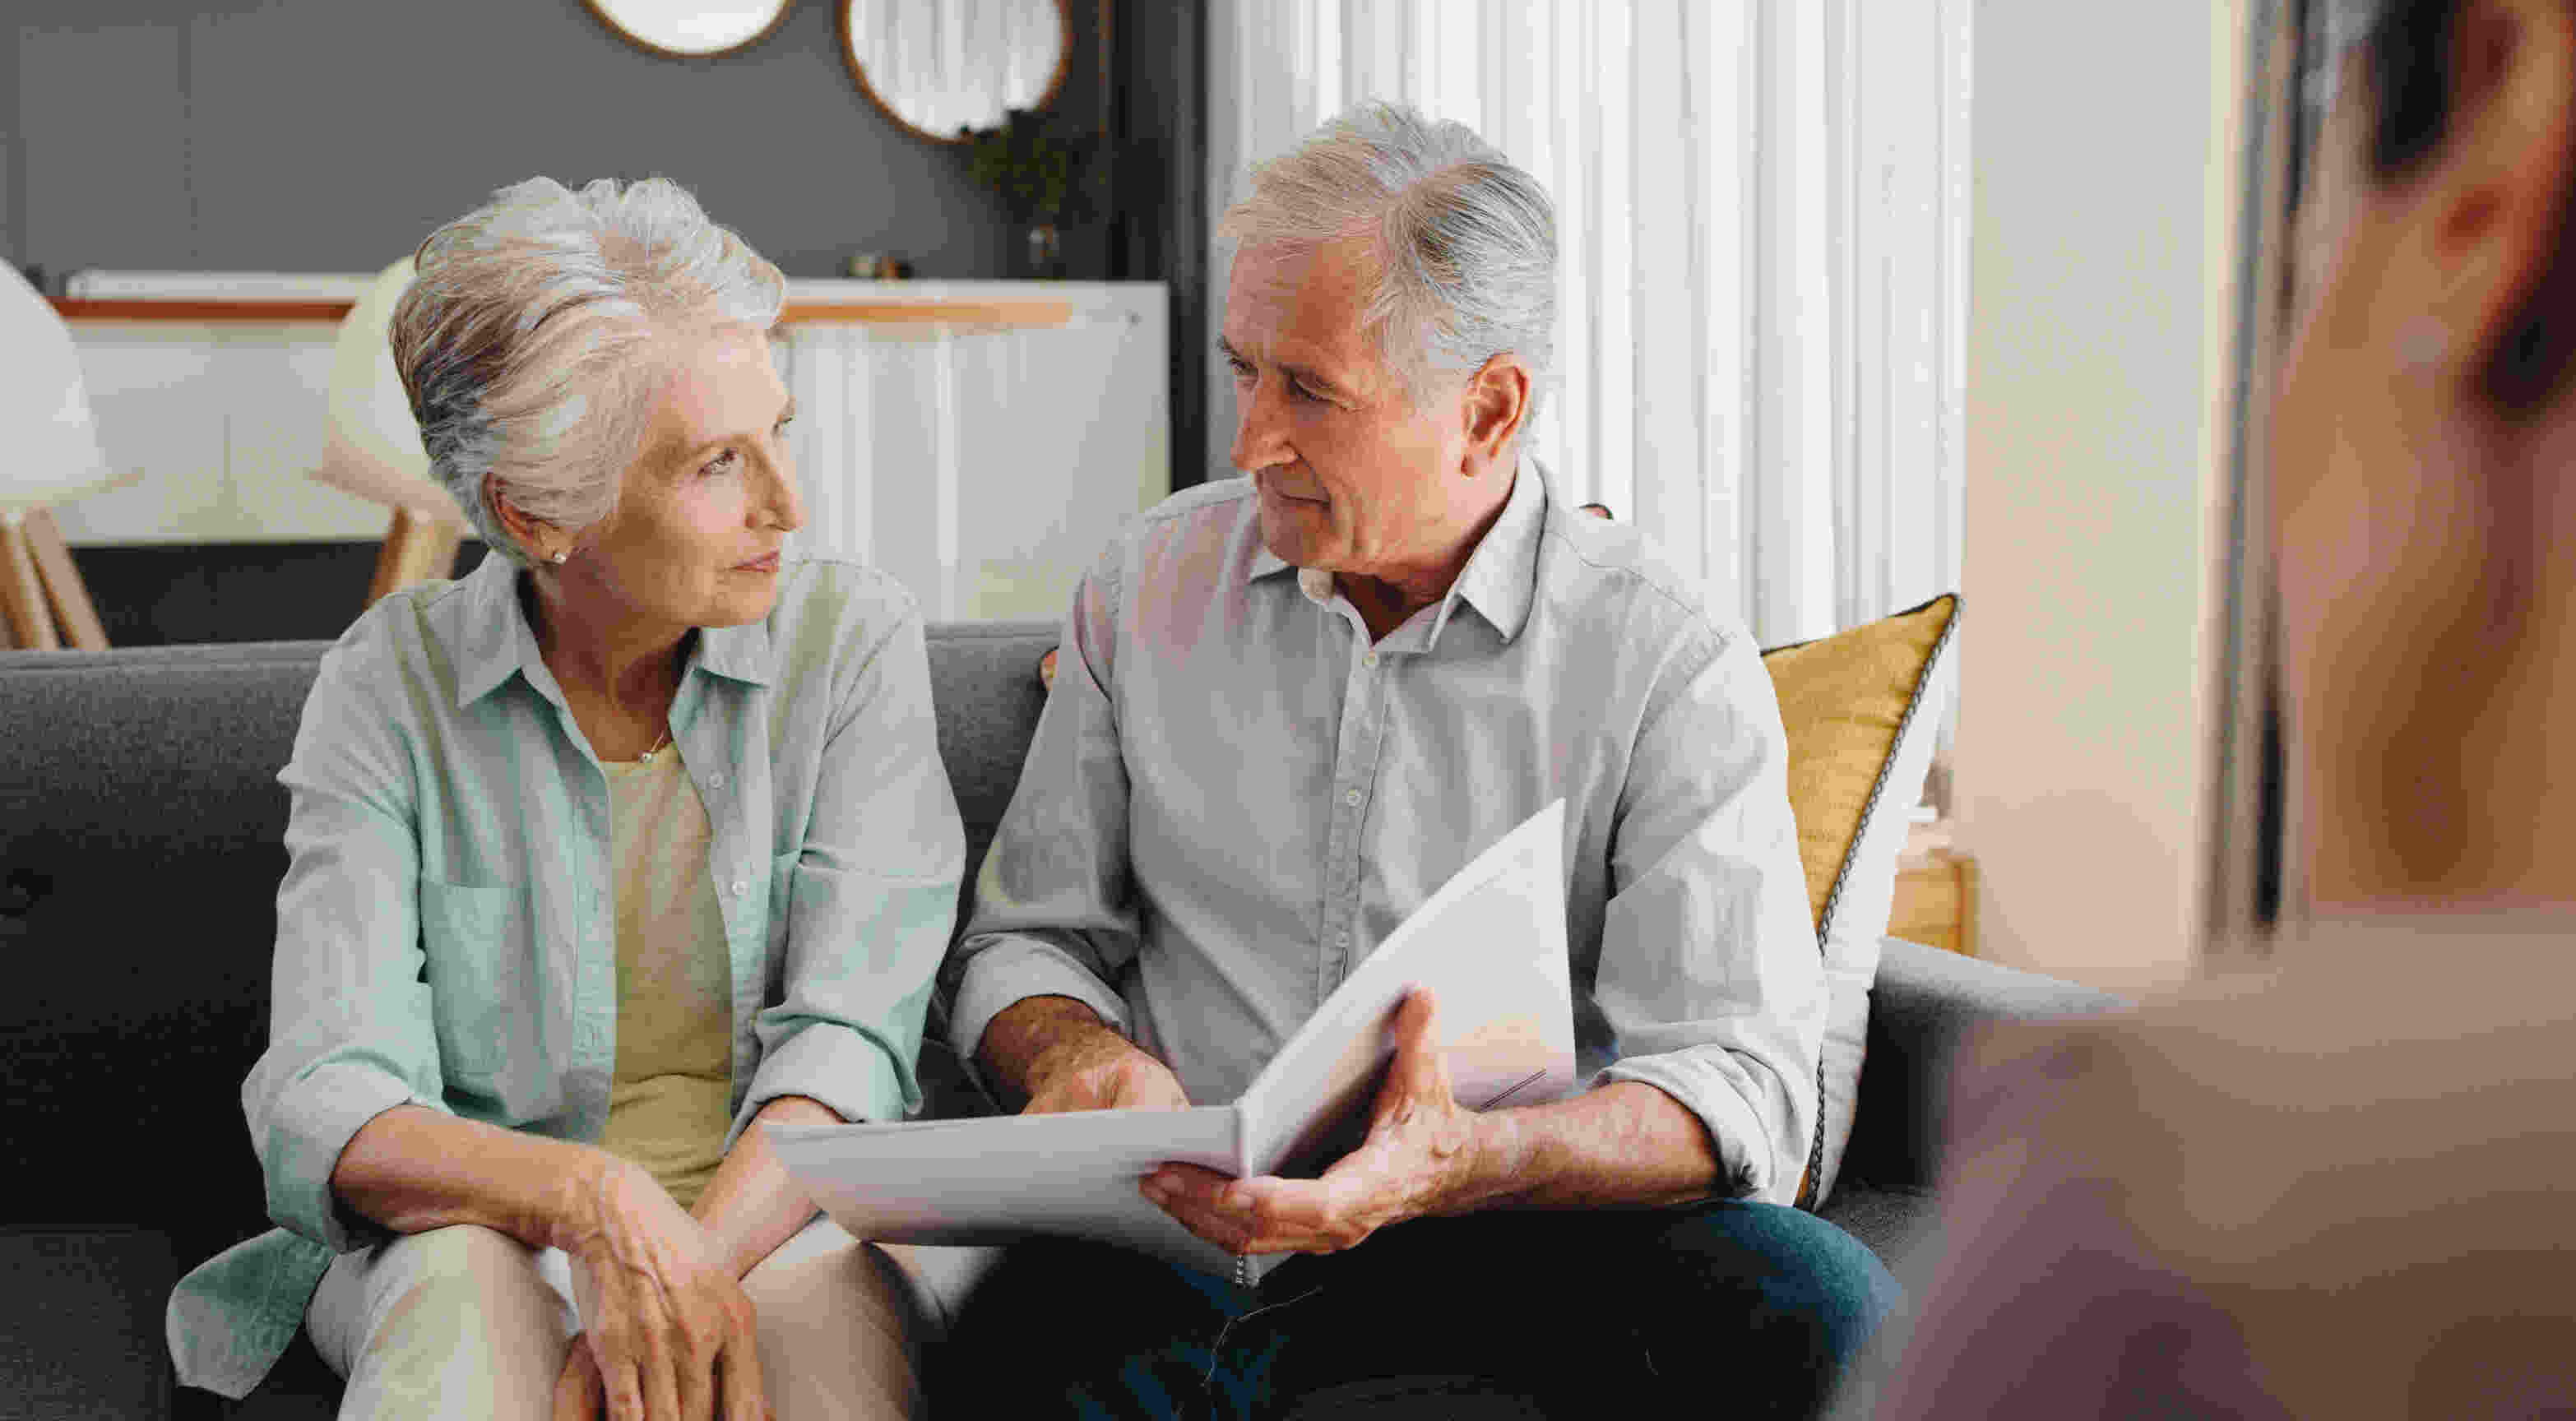 An older couple discussing finances